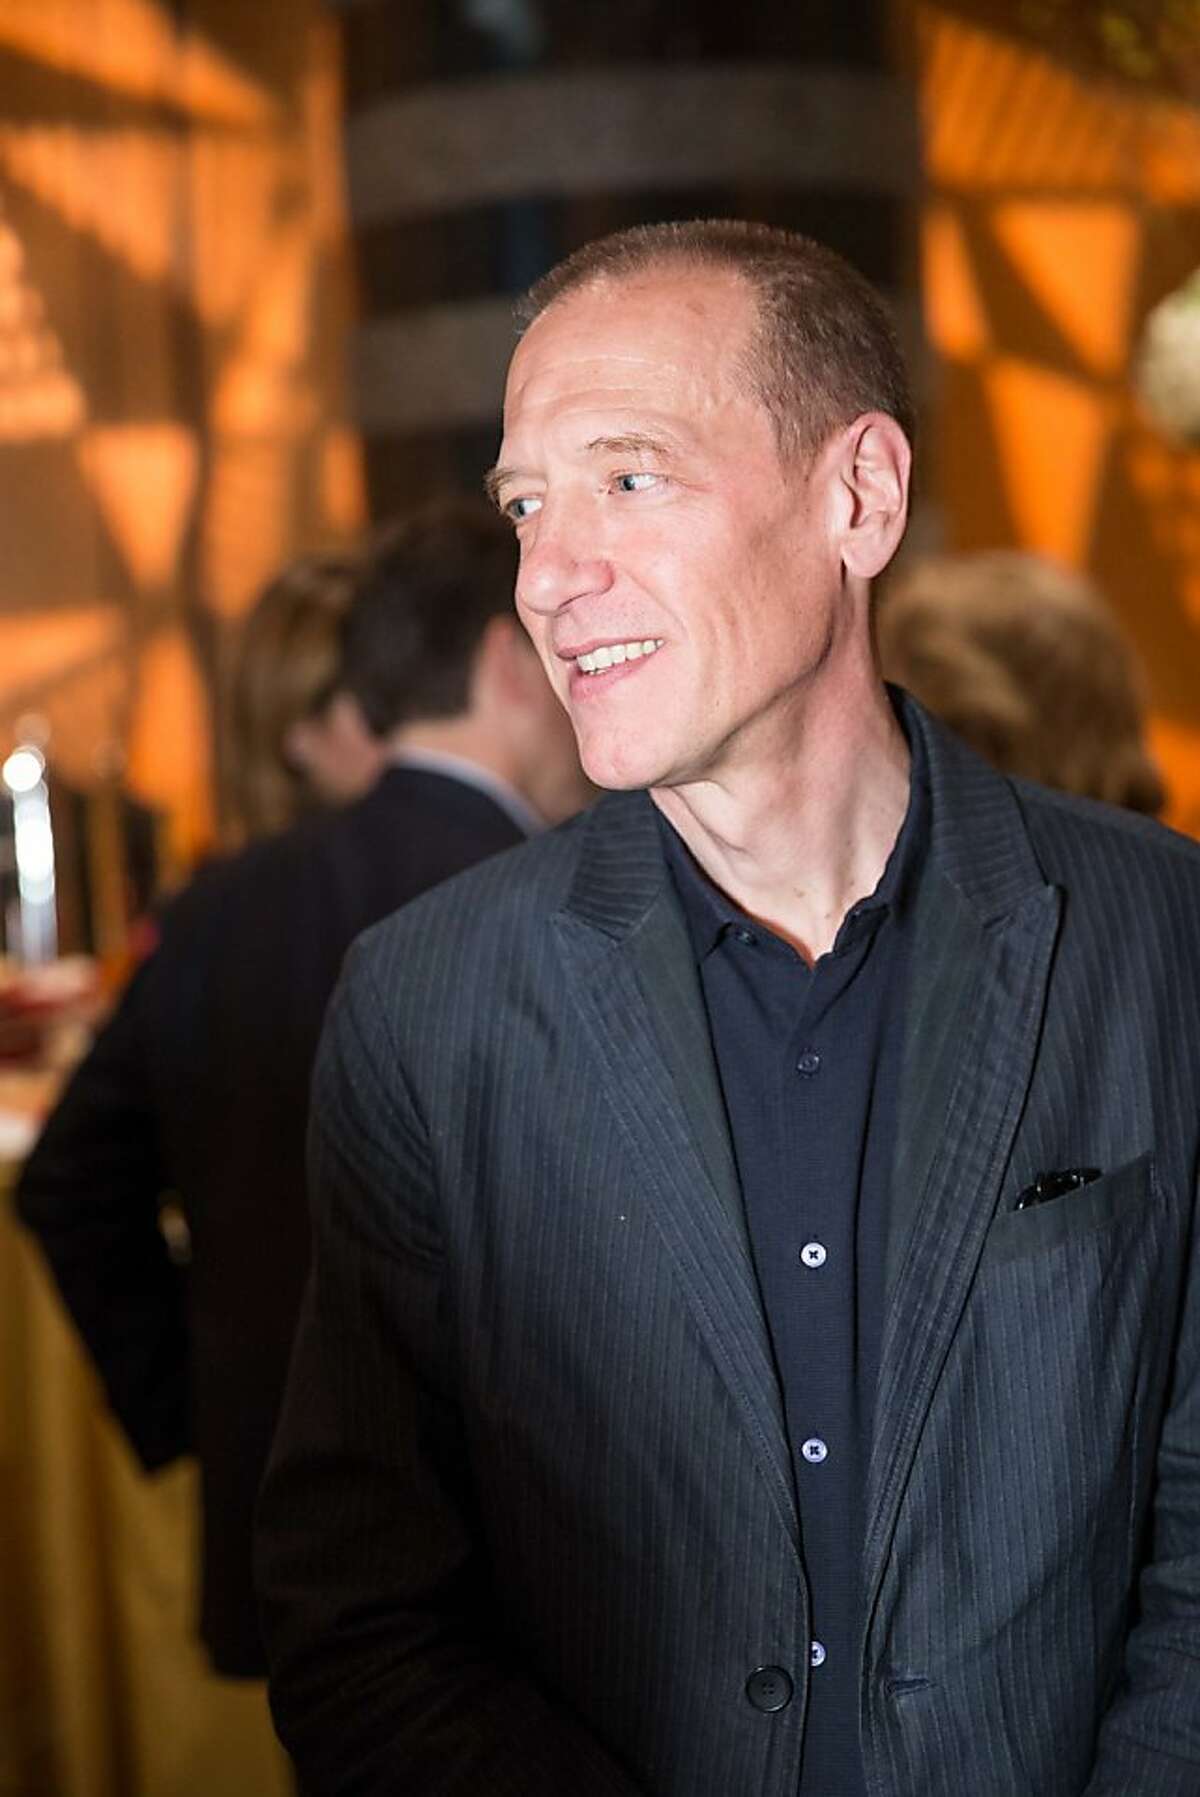 Artist Christian Marclay during the S.F. premiere of his 24-hour video montage "The Clock" presented by SFMOMA on April 2, 2013.